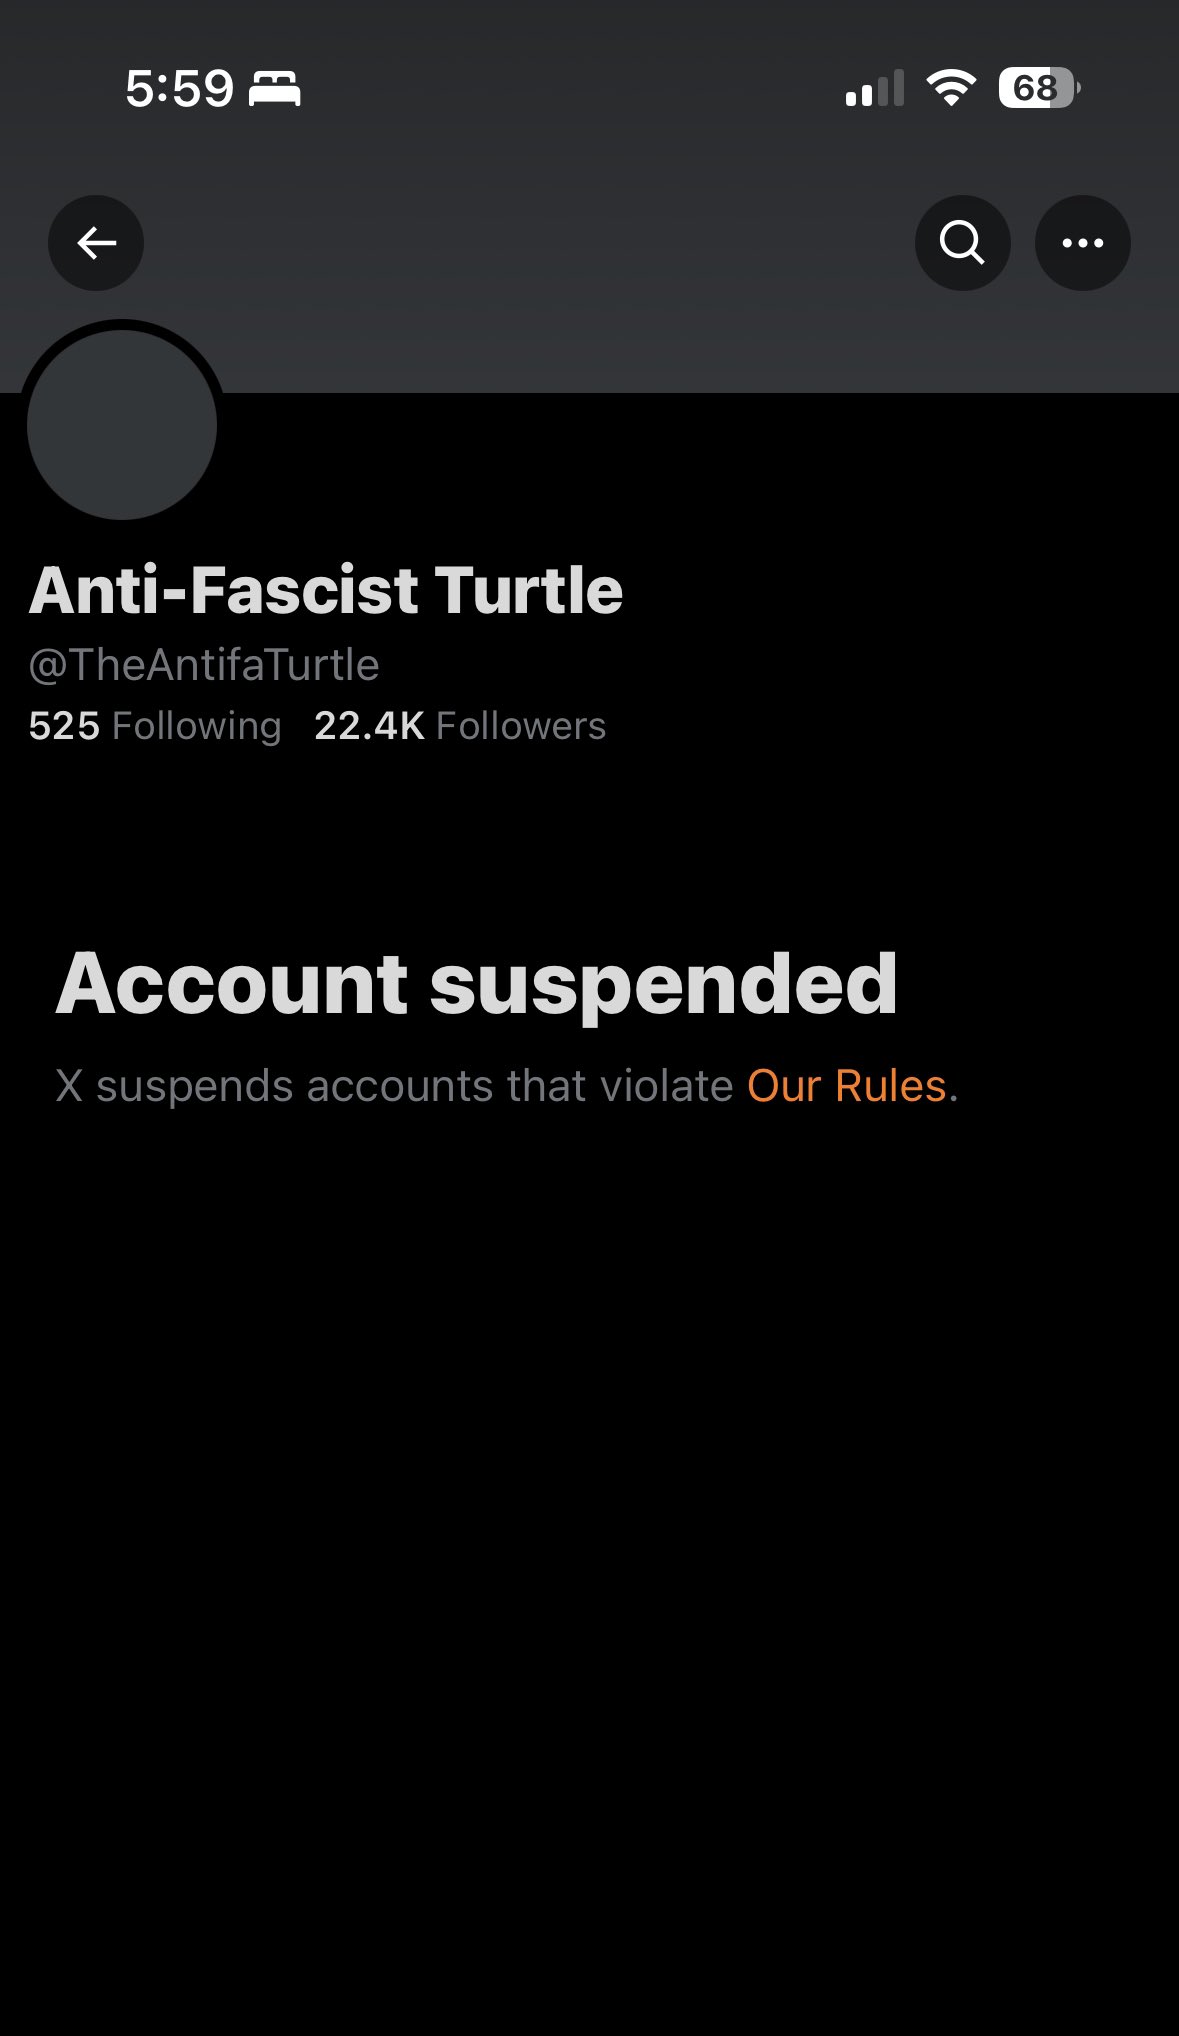 5:59 68 Anti-Fascist Turtle @TheAntifaTurtle 525 Following 22.4K Followers Account suspended X suspends accounts that violate Our Rules.